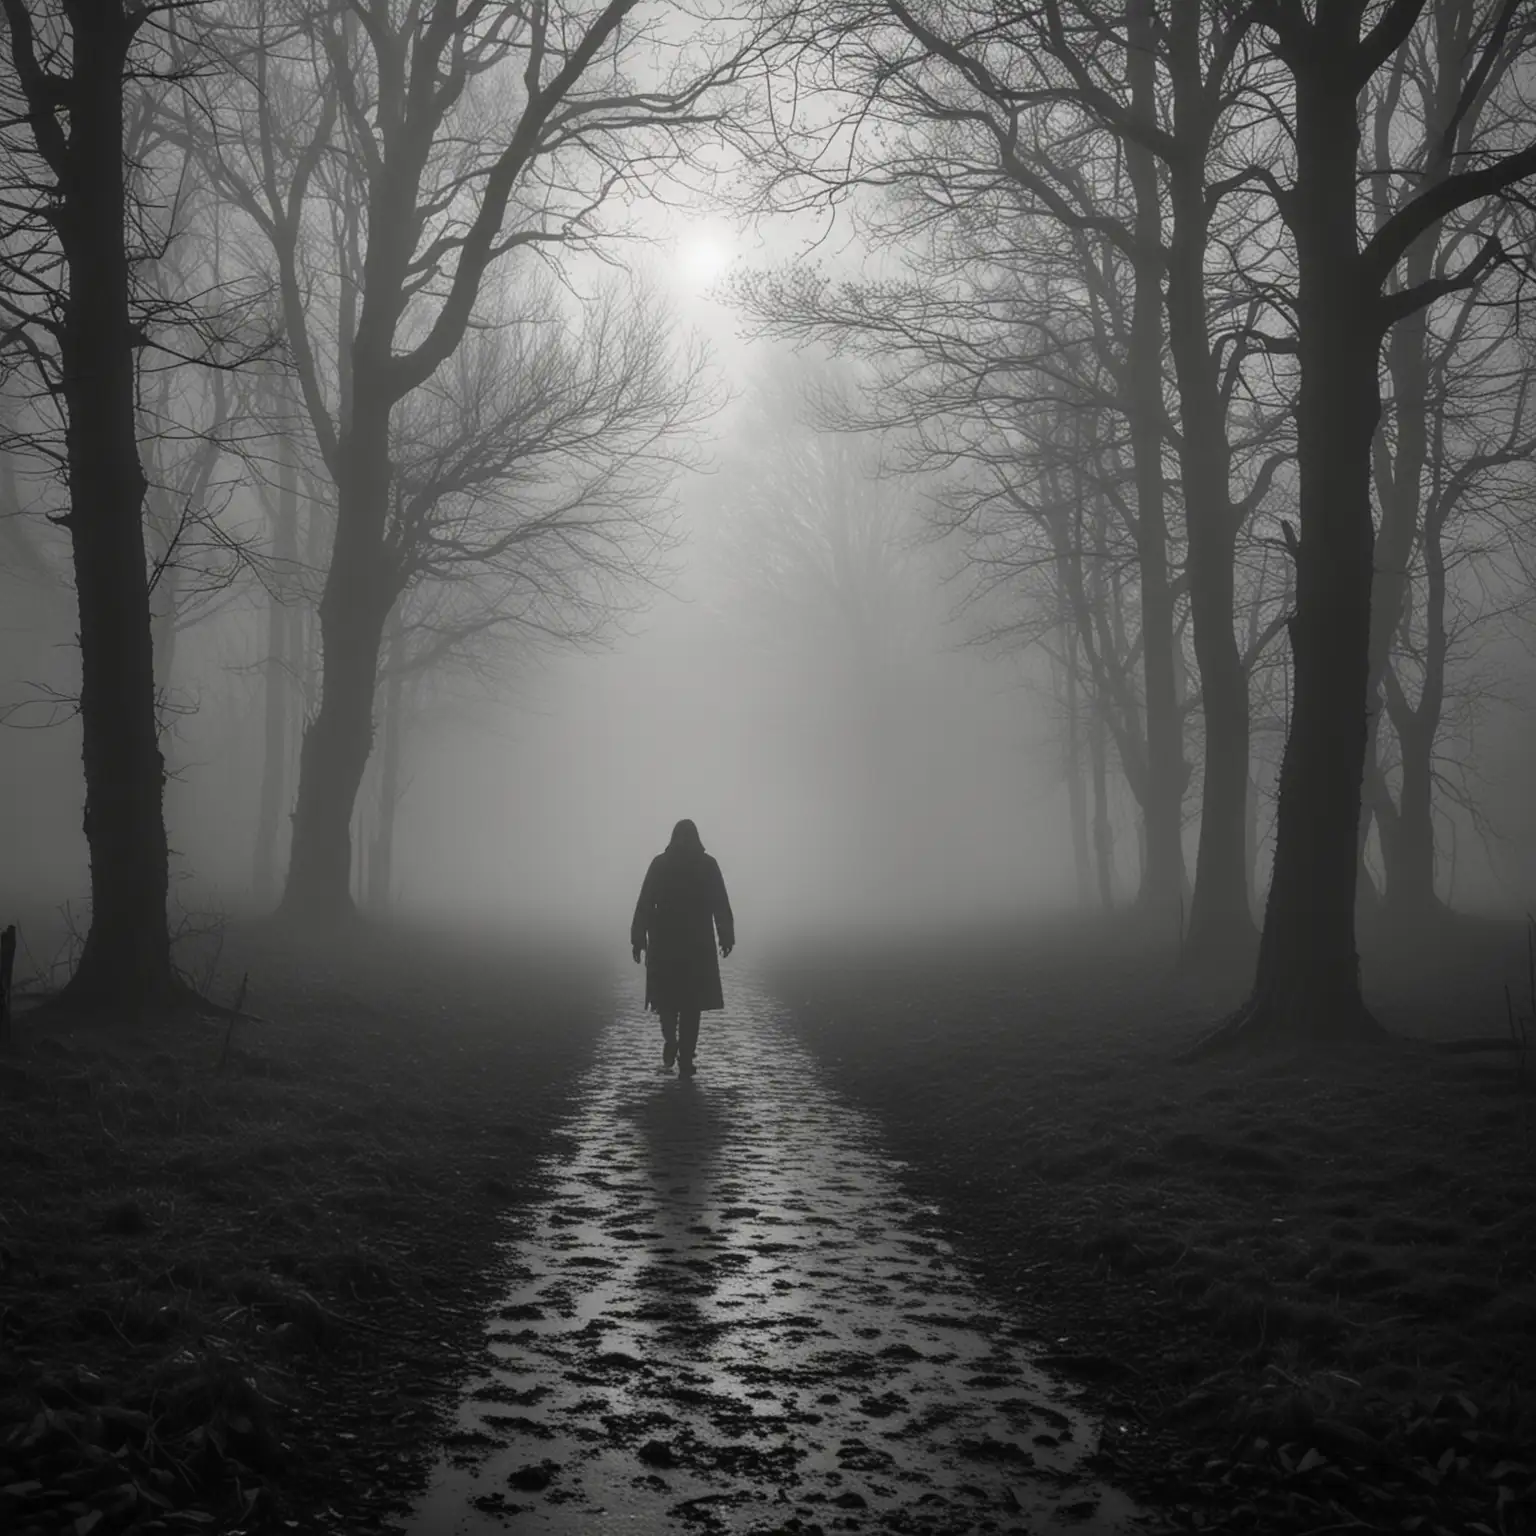 paranormal setting with shadowy figure in the mist